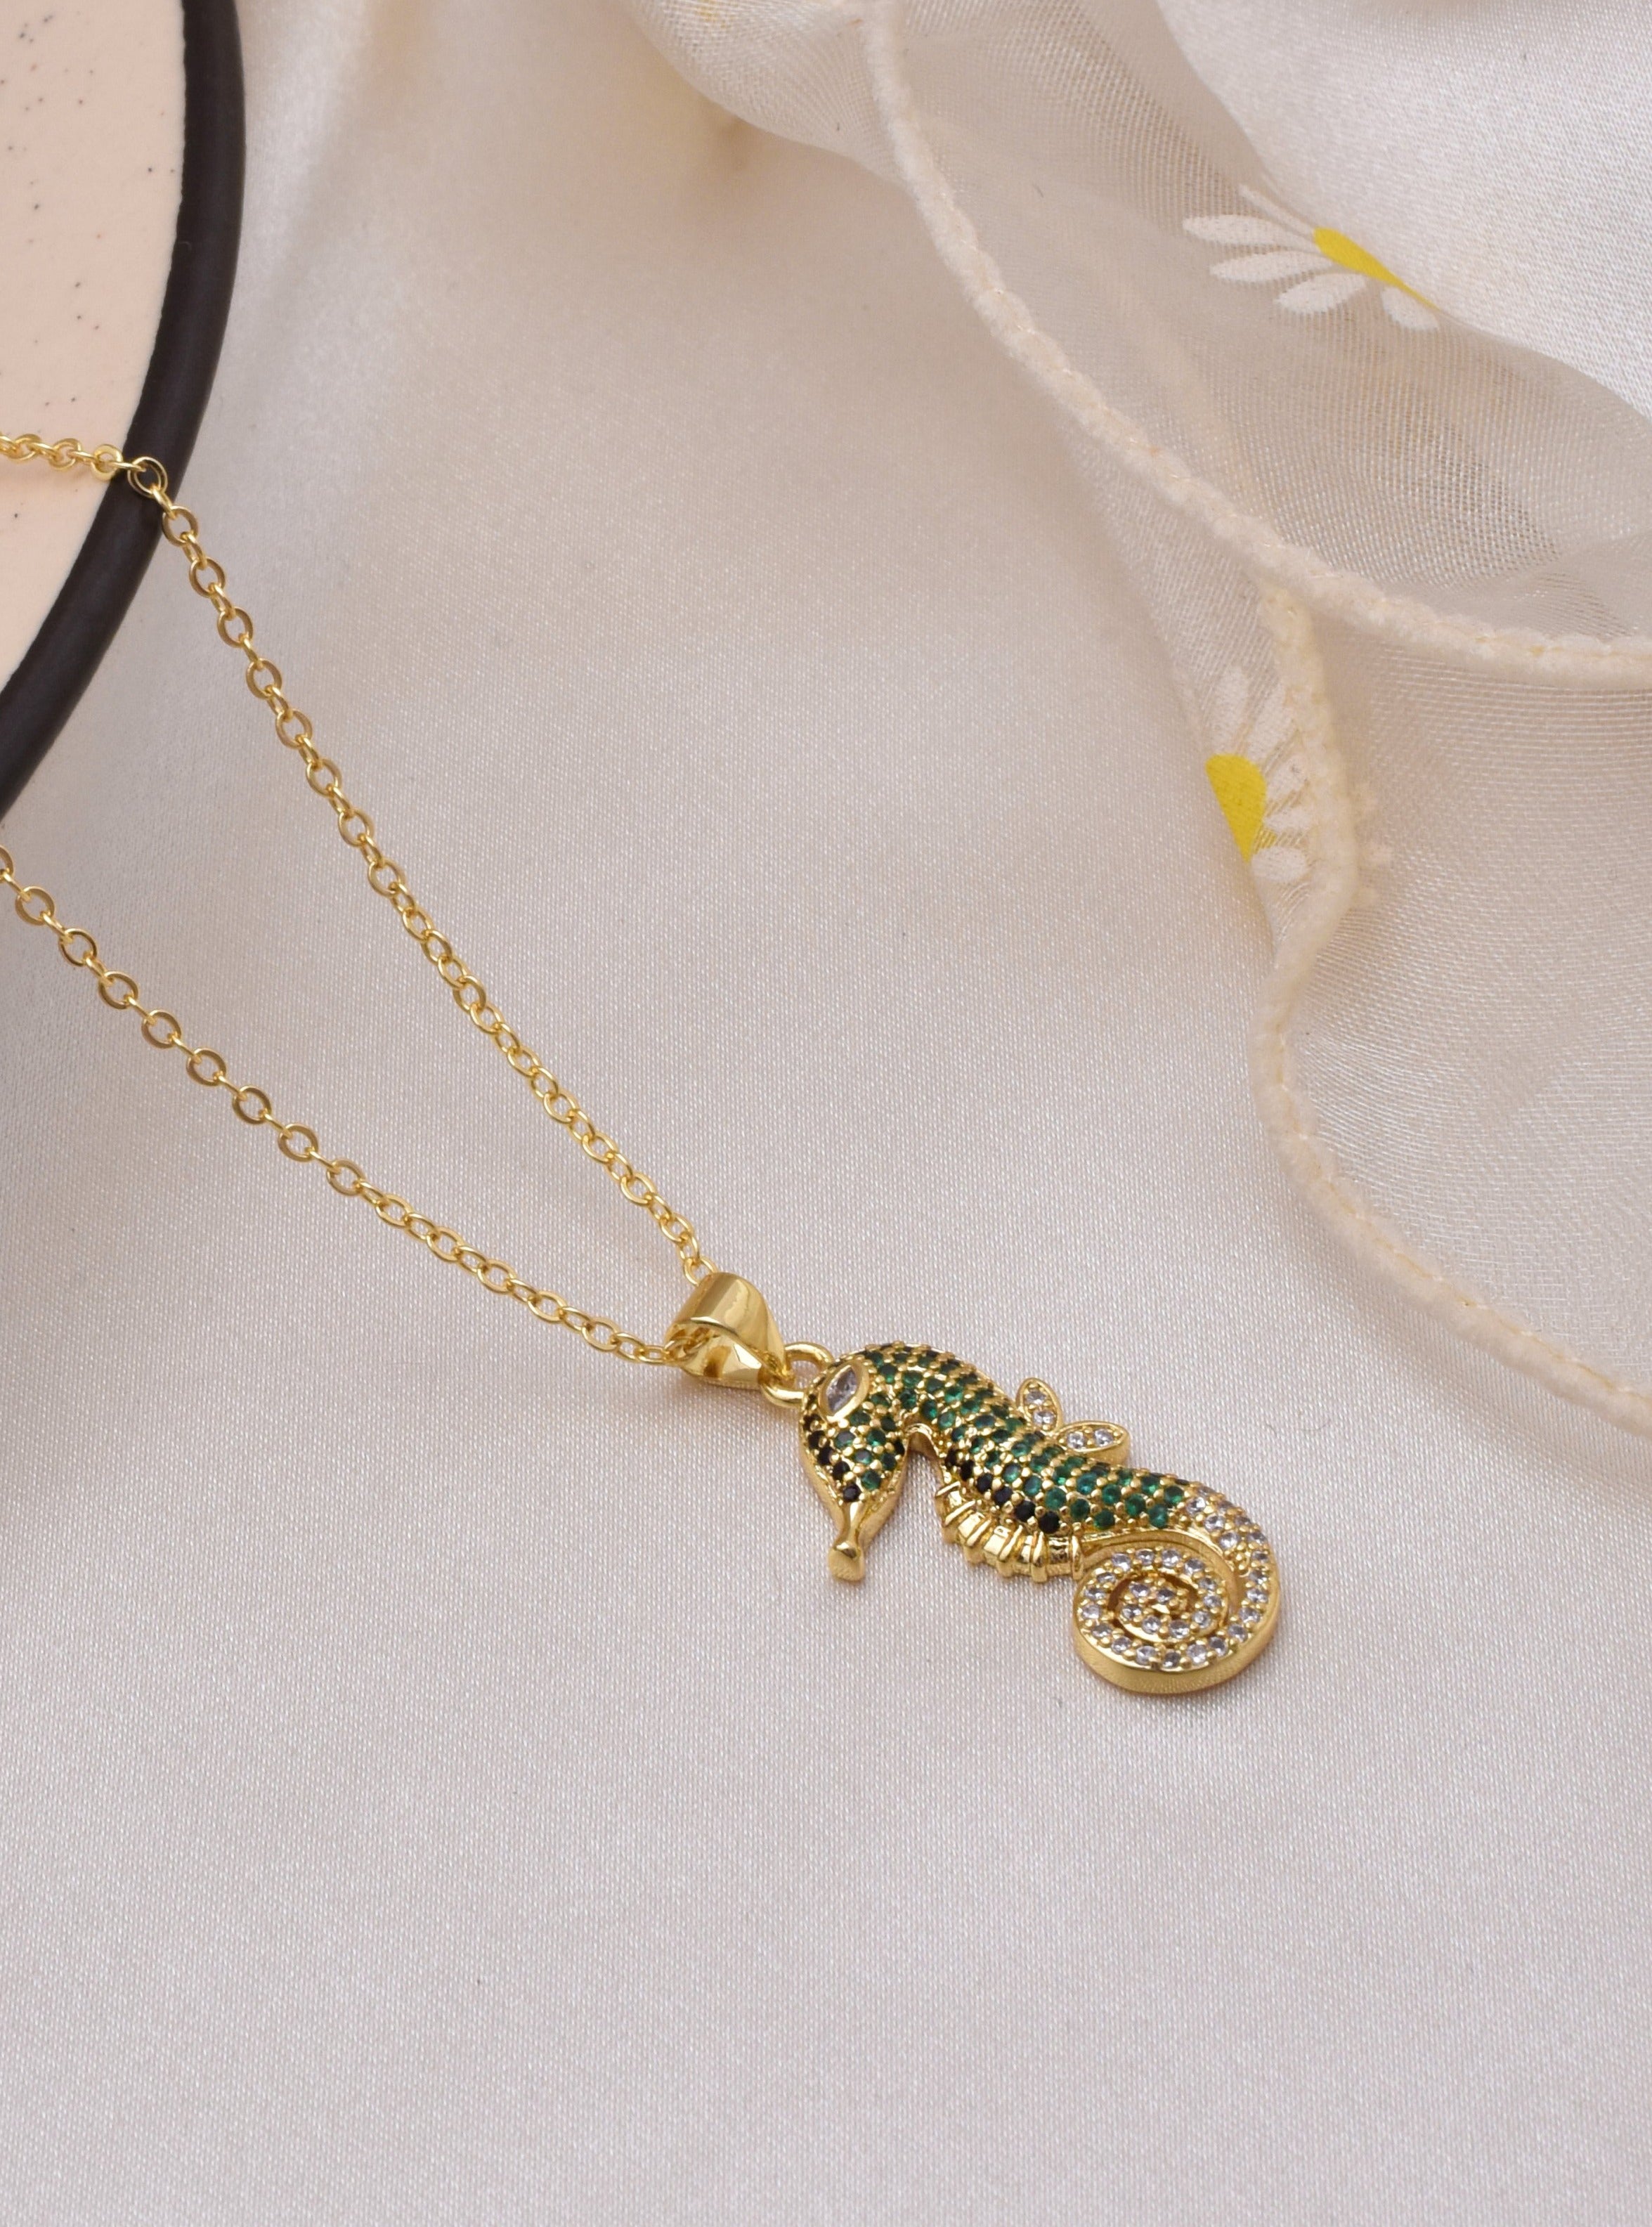 Green Sea Horse Charm Necklace